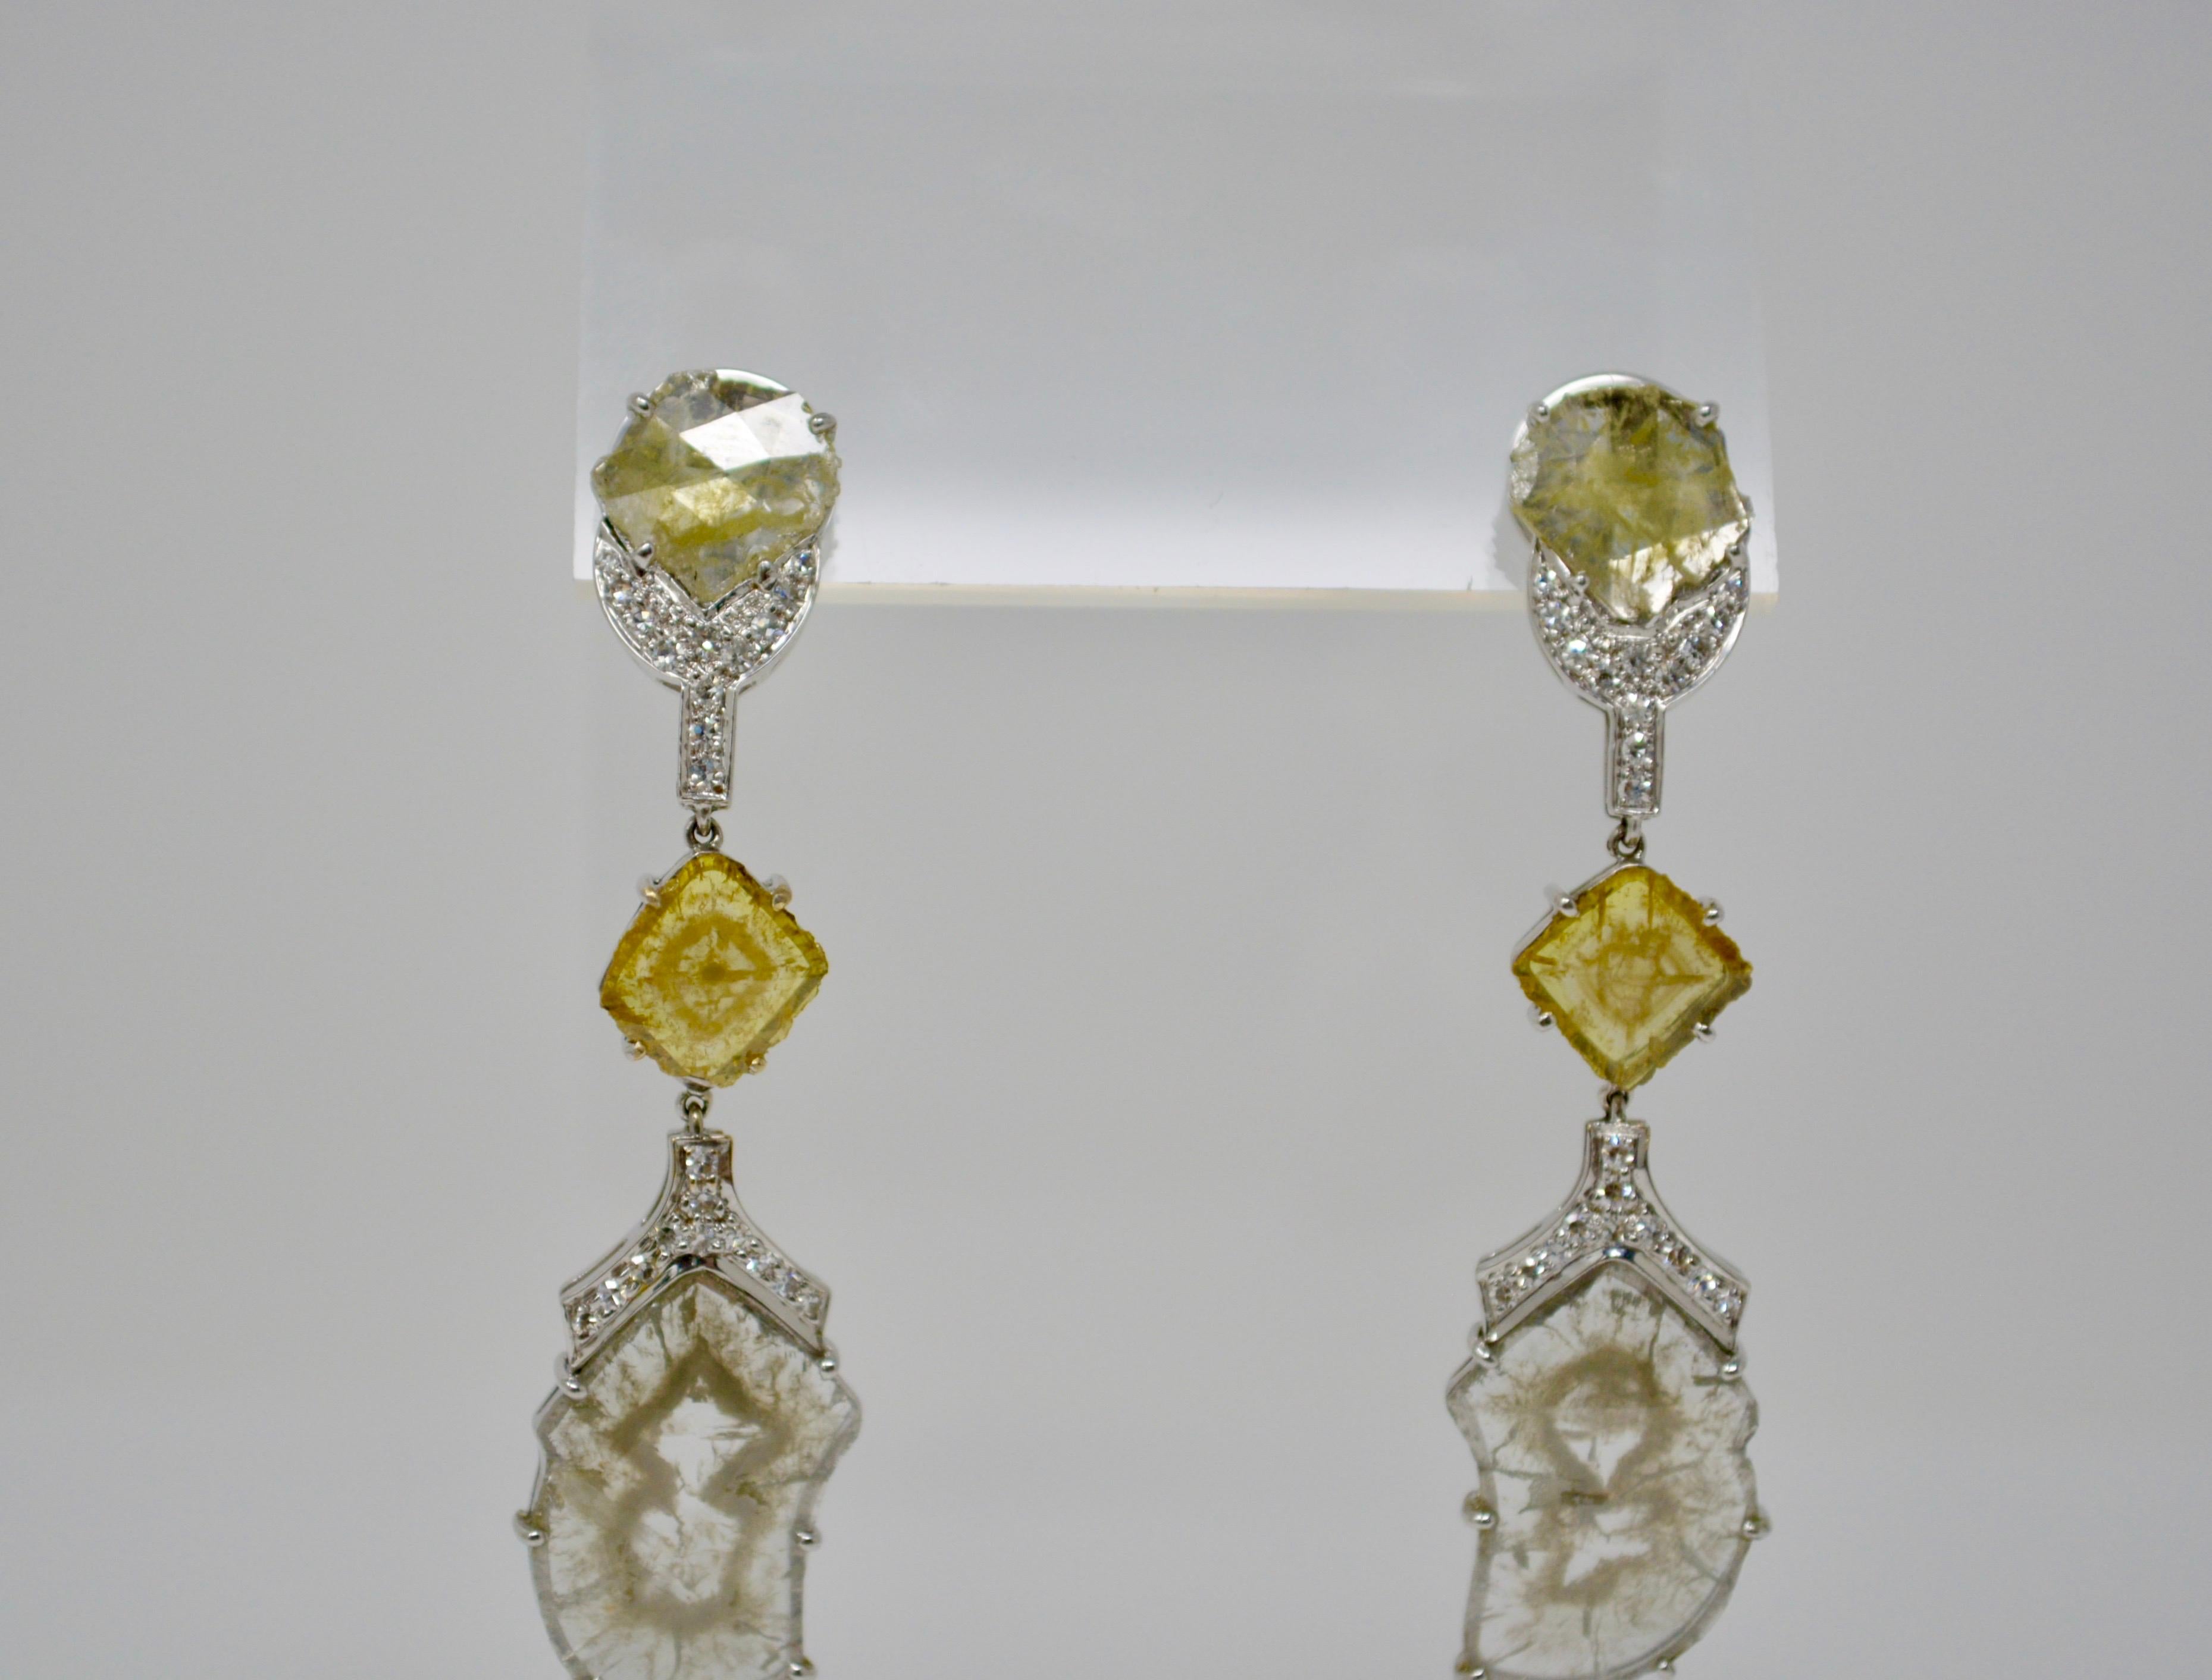 These beautiful natural fancy color diamond earring features natural yellow and gray slice diamonds weighing 8.33 carat and white round brilliant diamond melees weighing 0.37 carat. These earrings look extremely attractive, elegant and classy. 
They